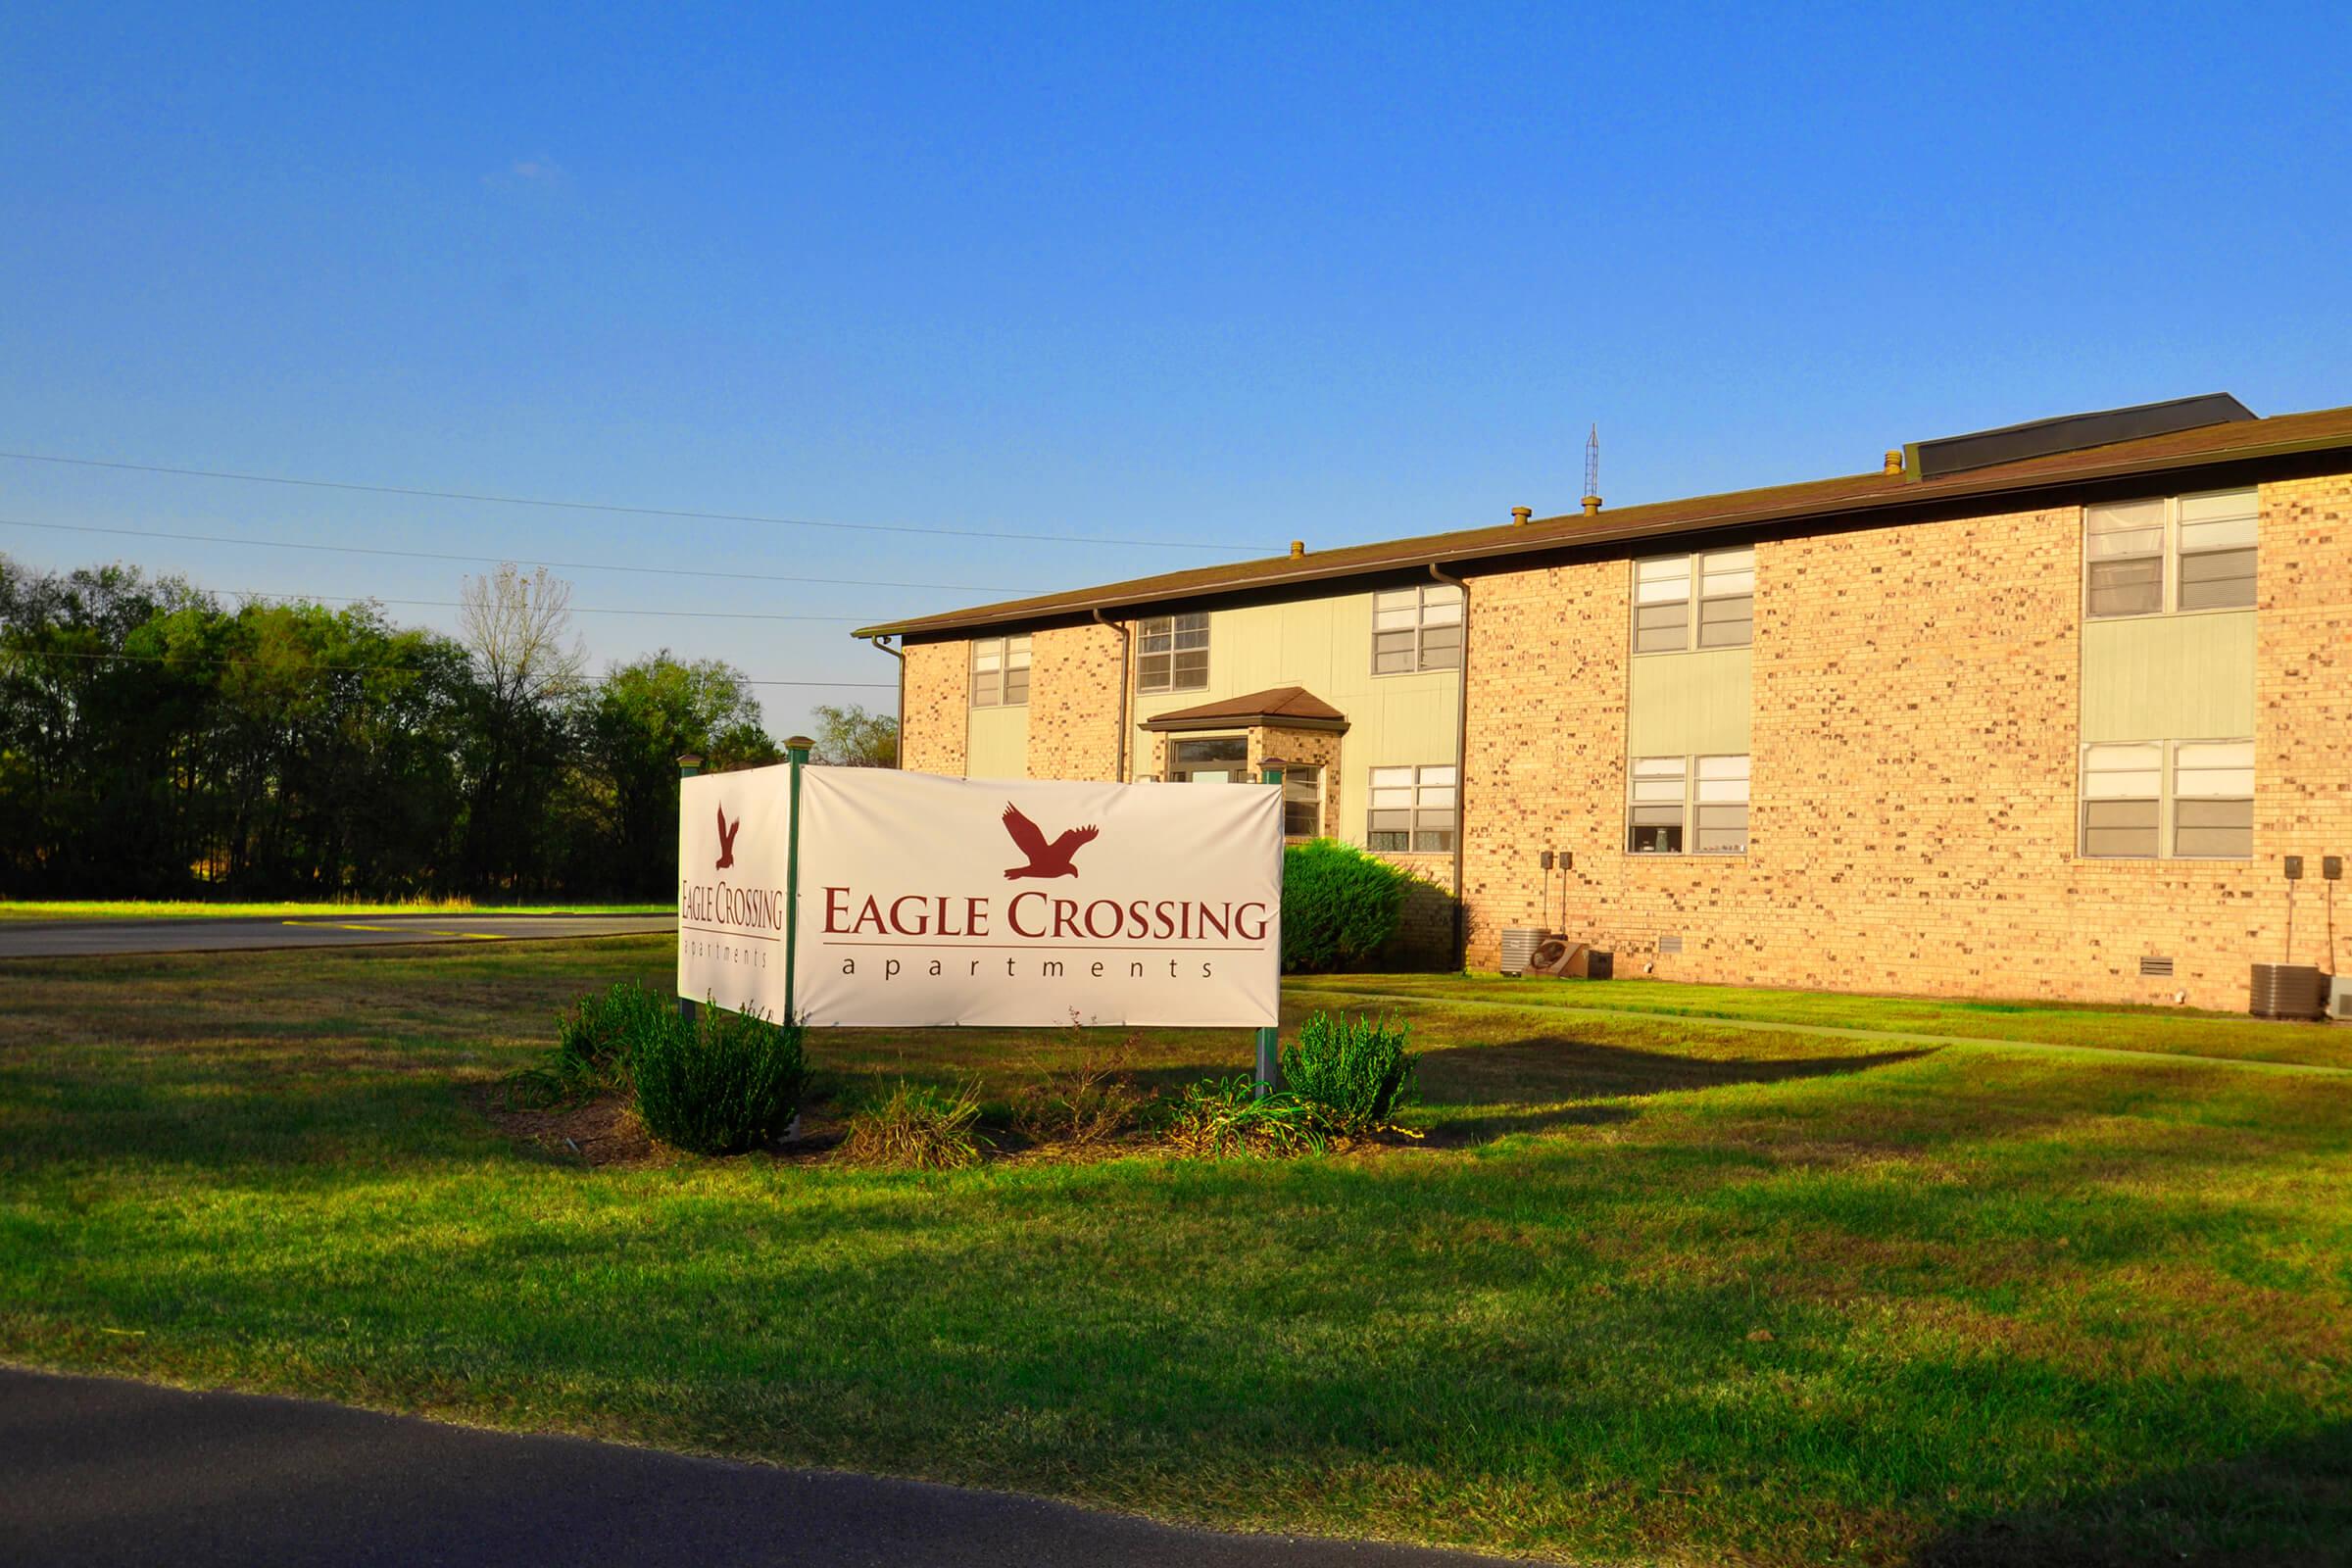 Eagle Crossing Apartments in Hopkinsville, KY